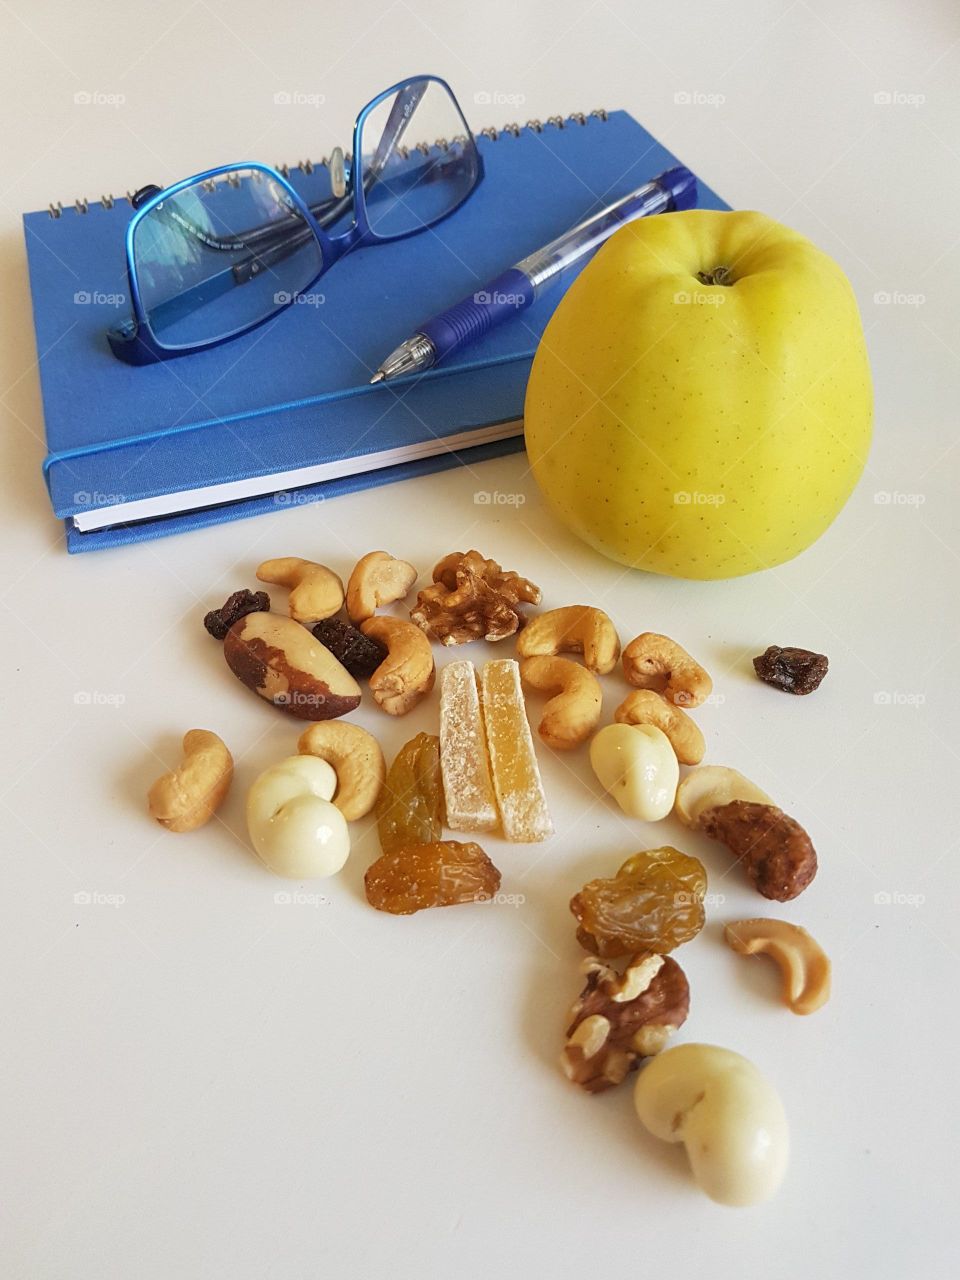 one Apple and some nuts for a daily snack